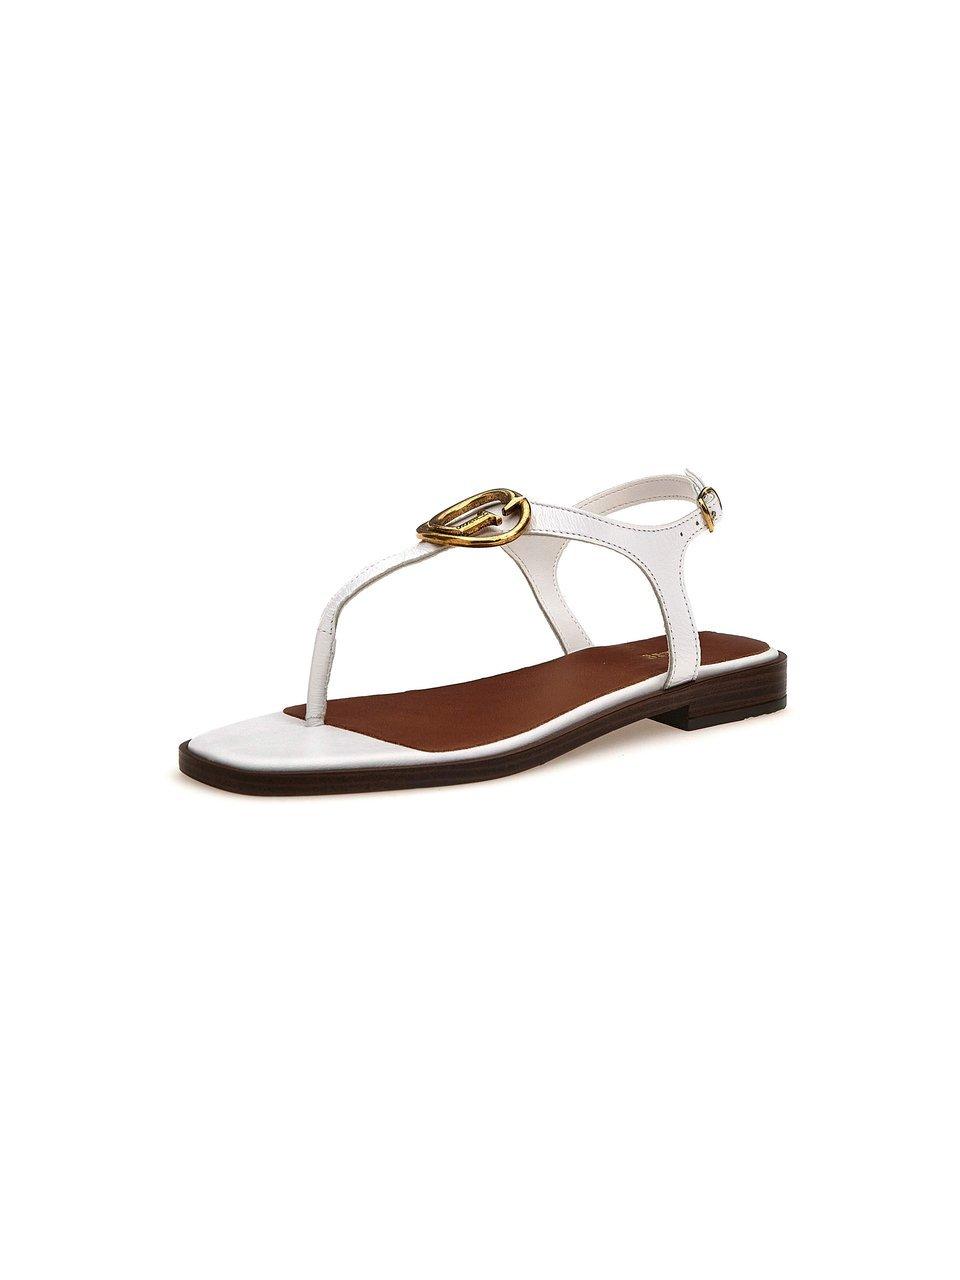 Guess - Thong sandals - white